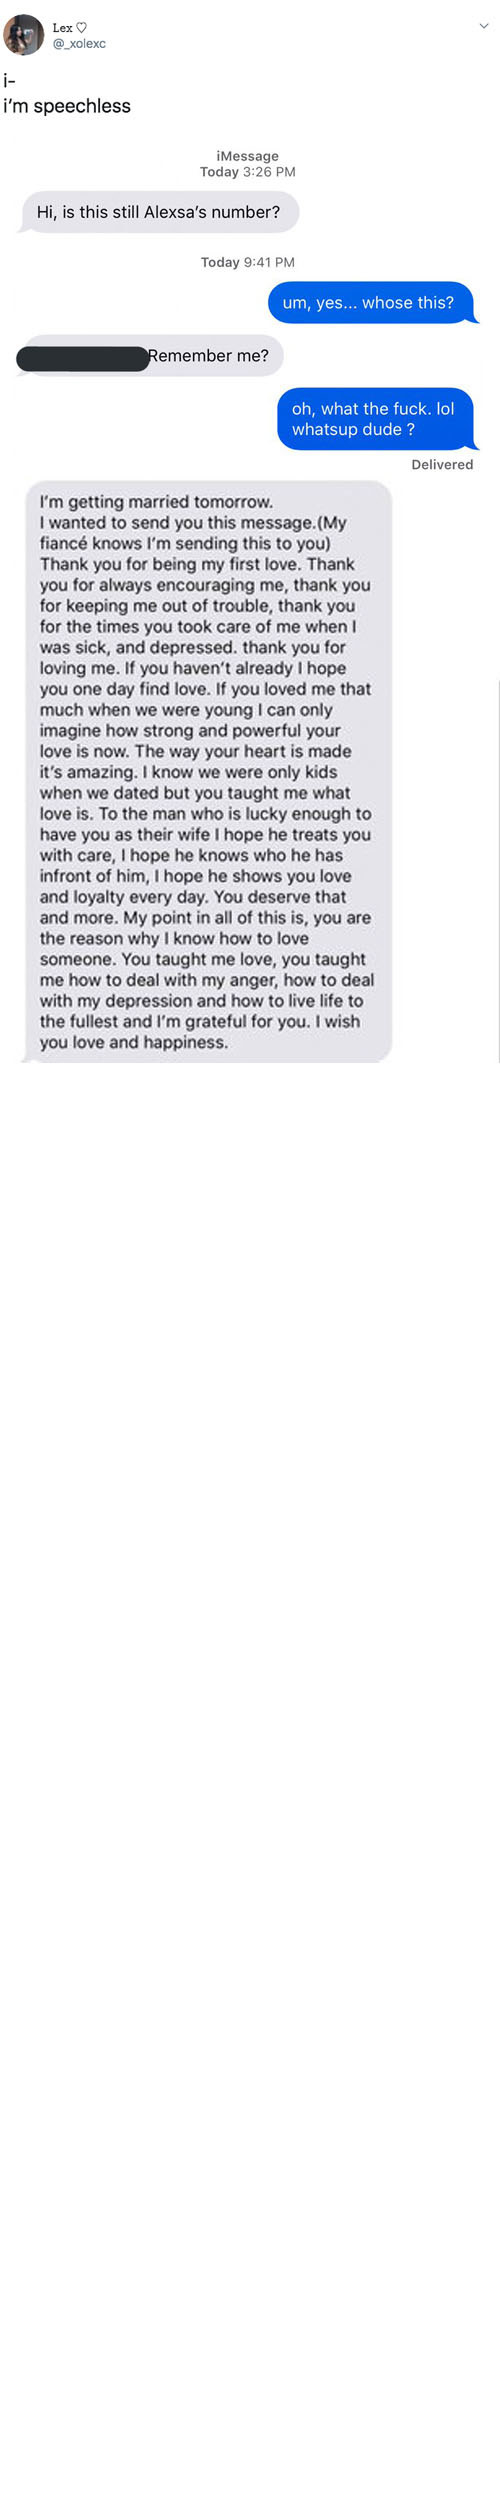 This Woman Got A Text From Her Ex Right Before His Wedding Day, And Its Surprisingly Heartwarming